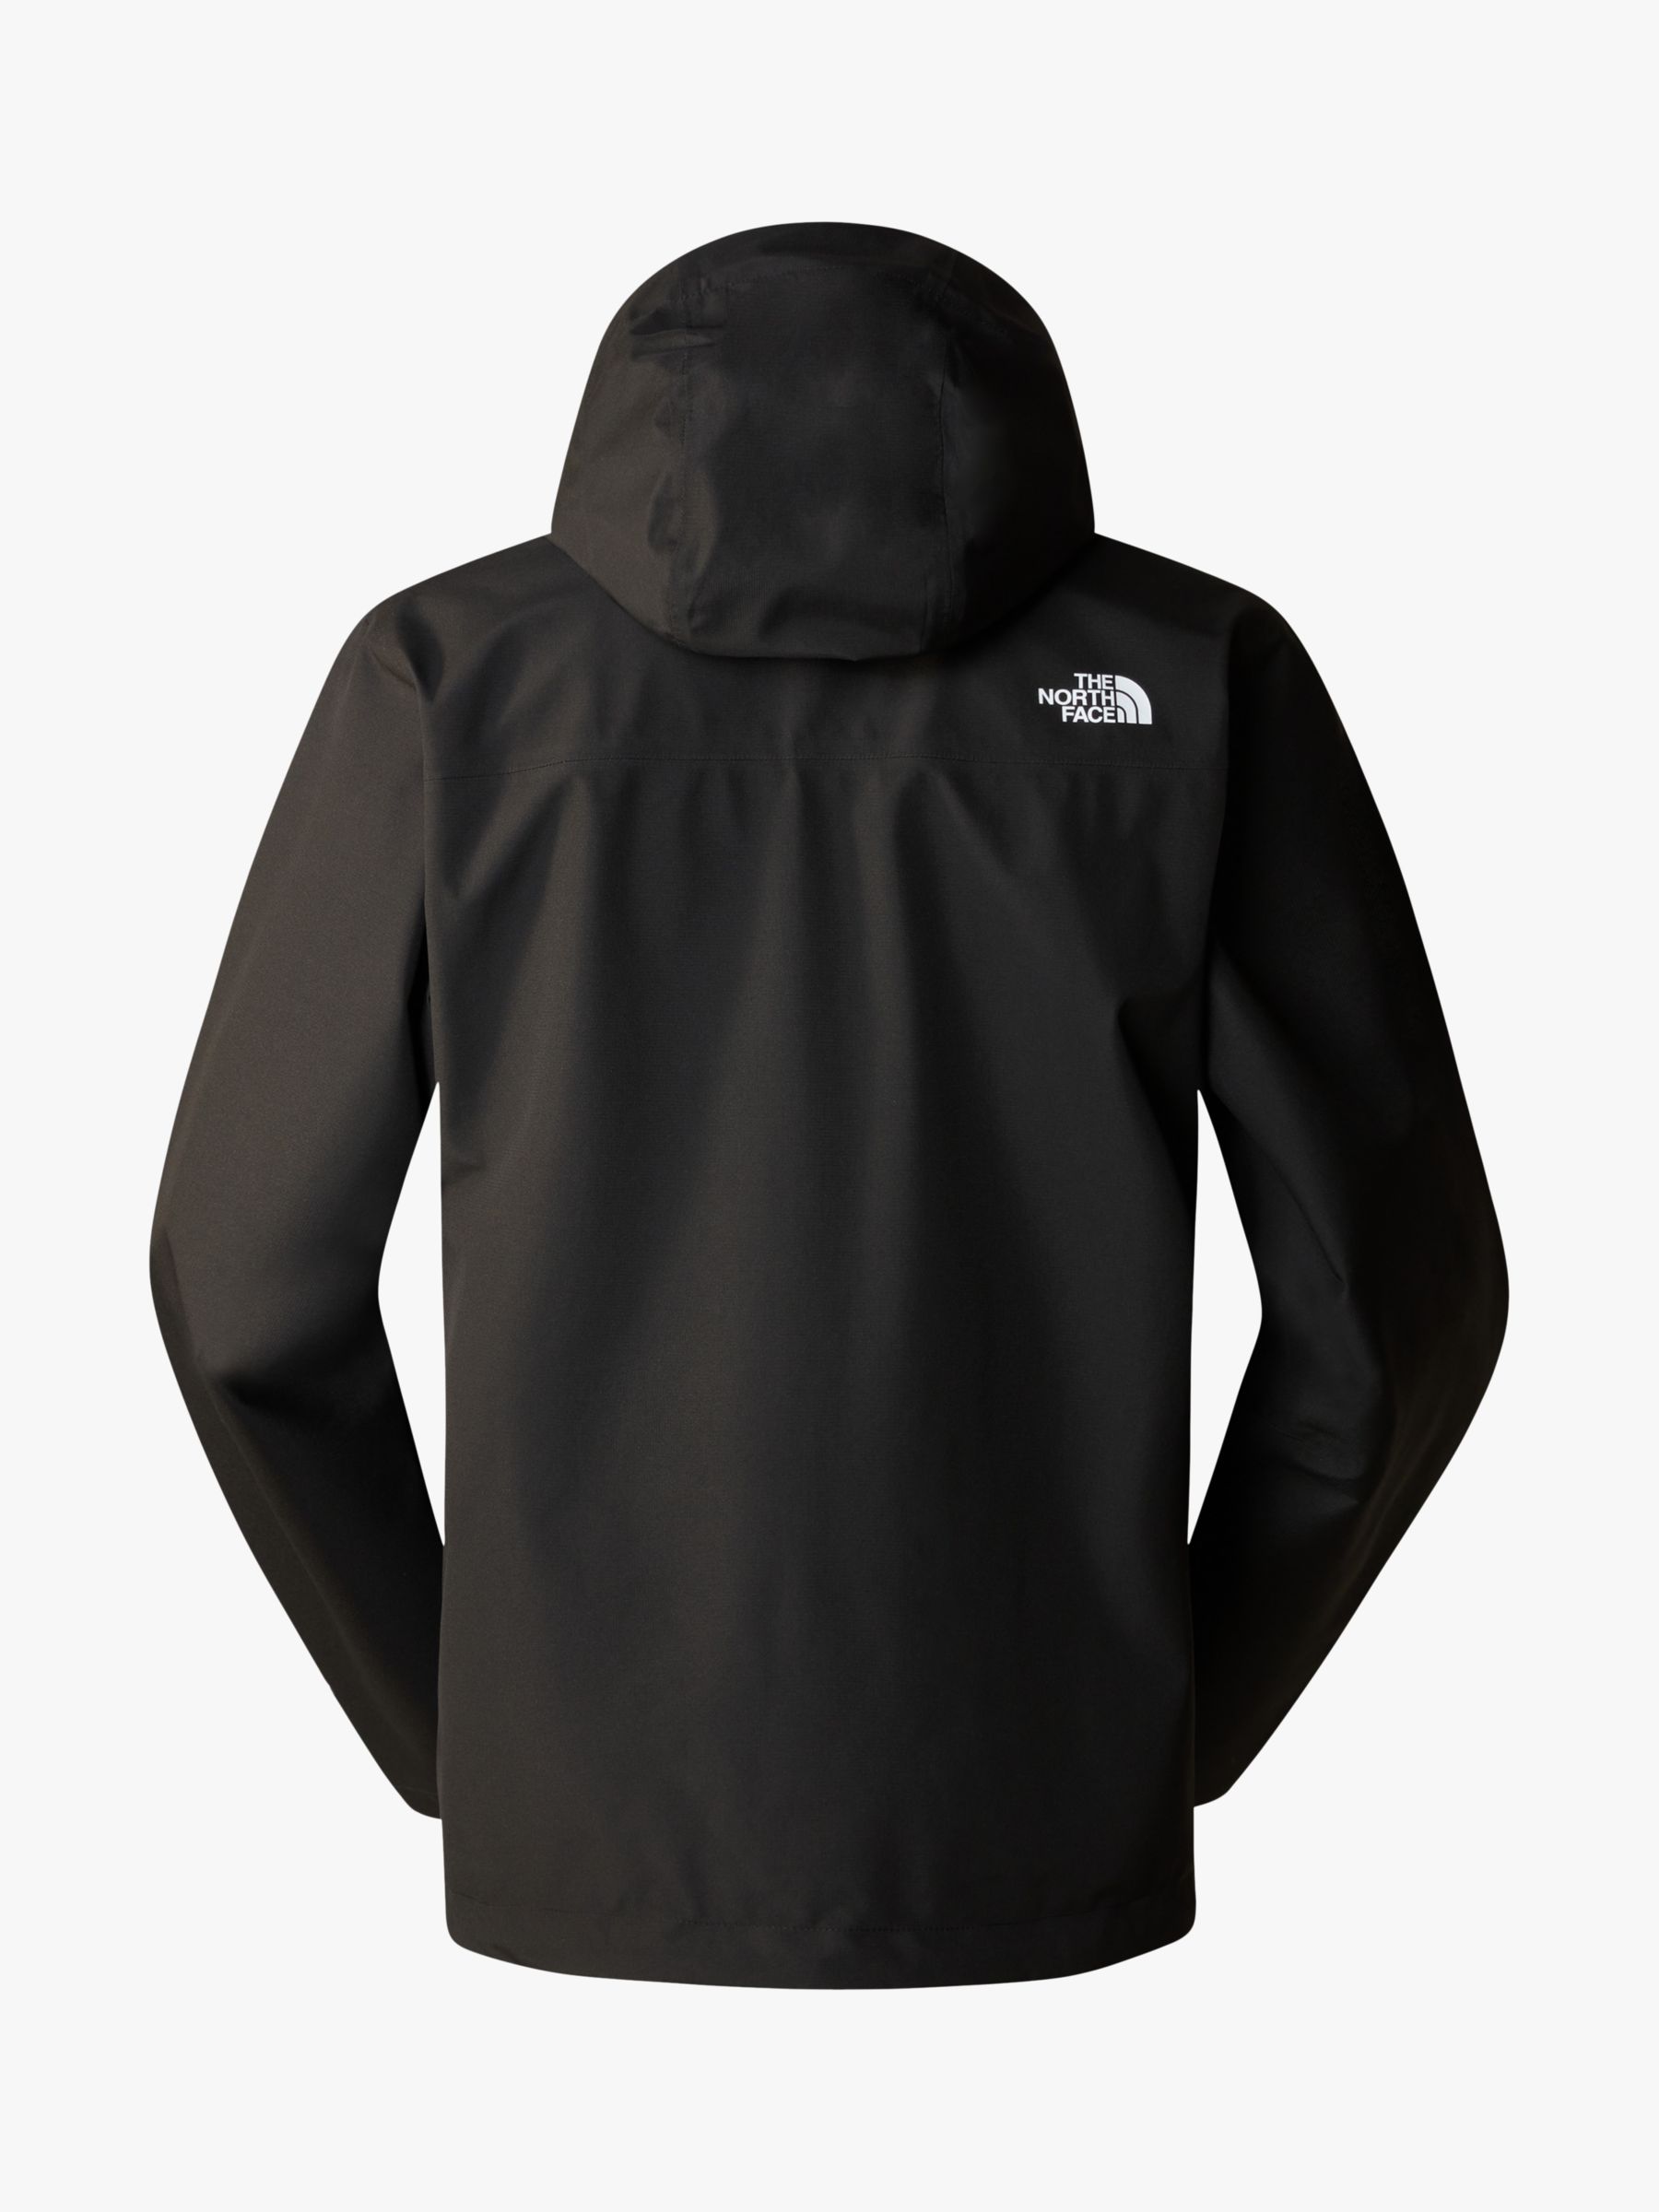 The North Face Whiton 3 Layer Jacket, Tnf Black, XL